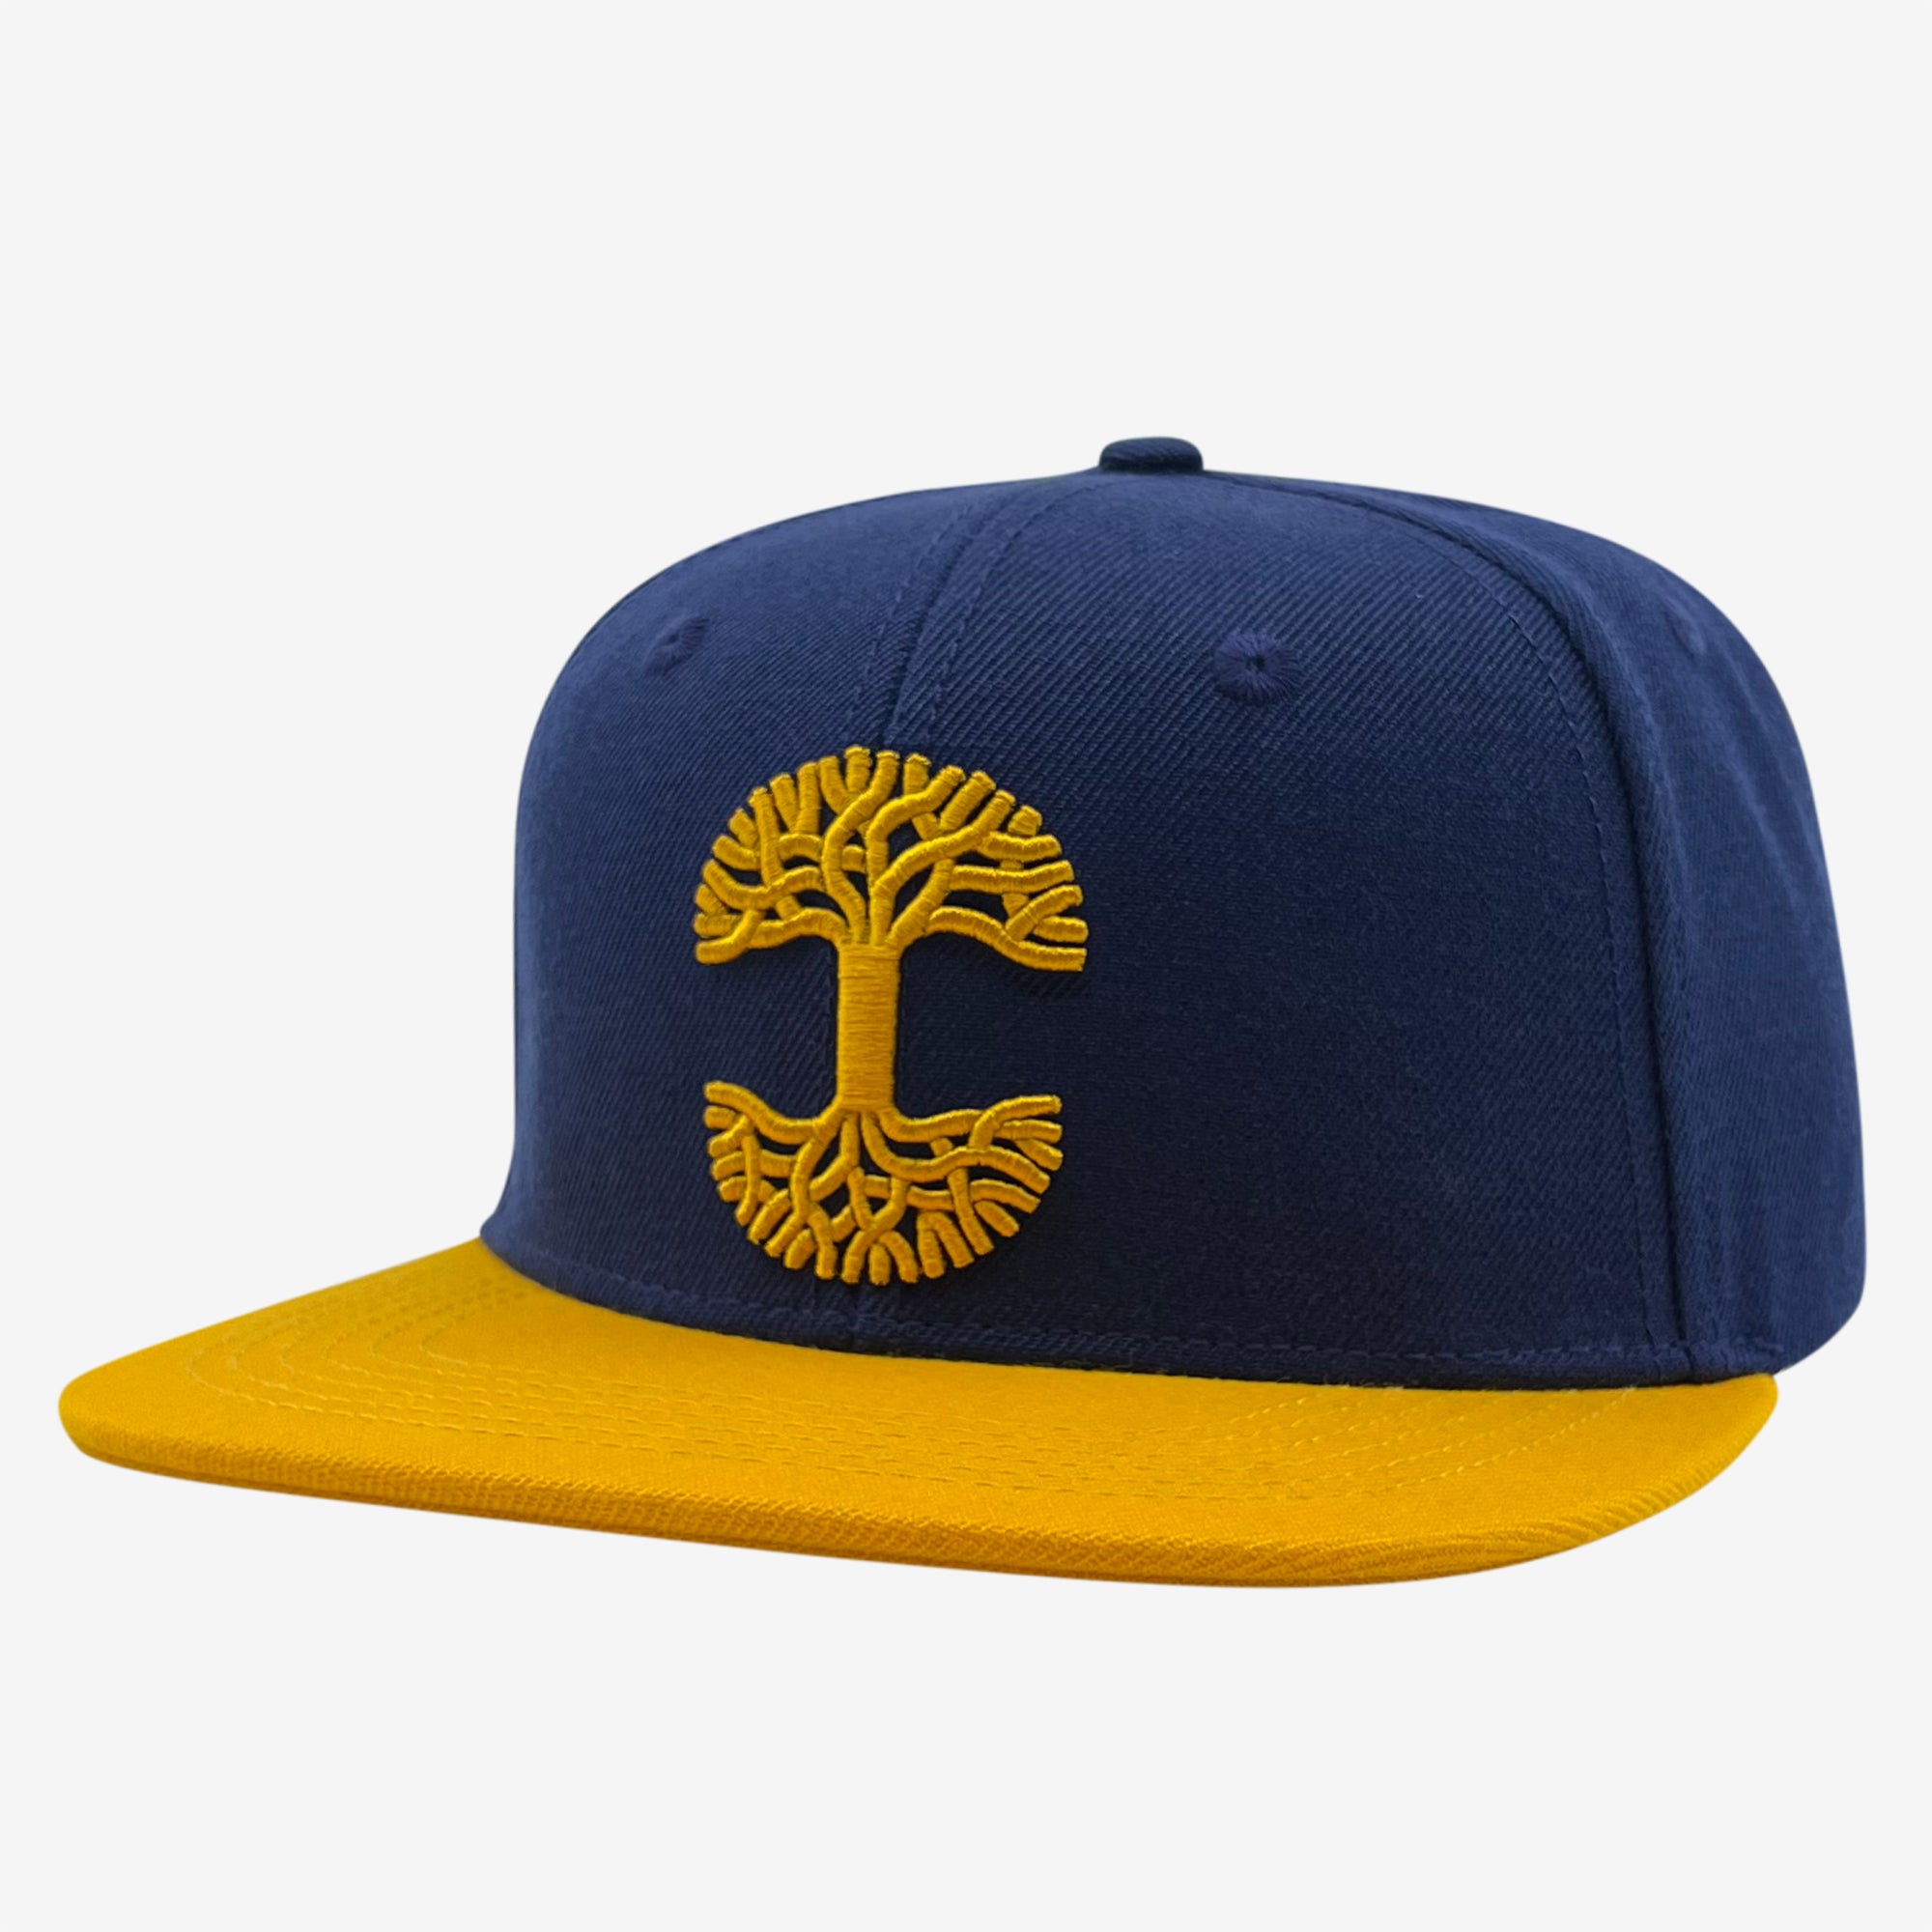 Side view of royal blue snapback hat with yellow embroidered Oaklandish tree logo on crown and contrasting yellow visor.